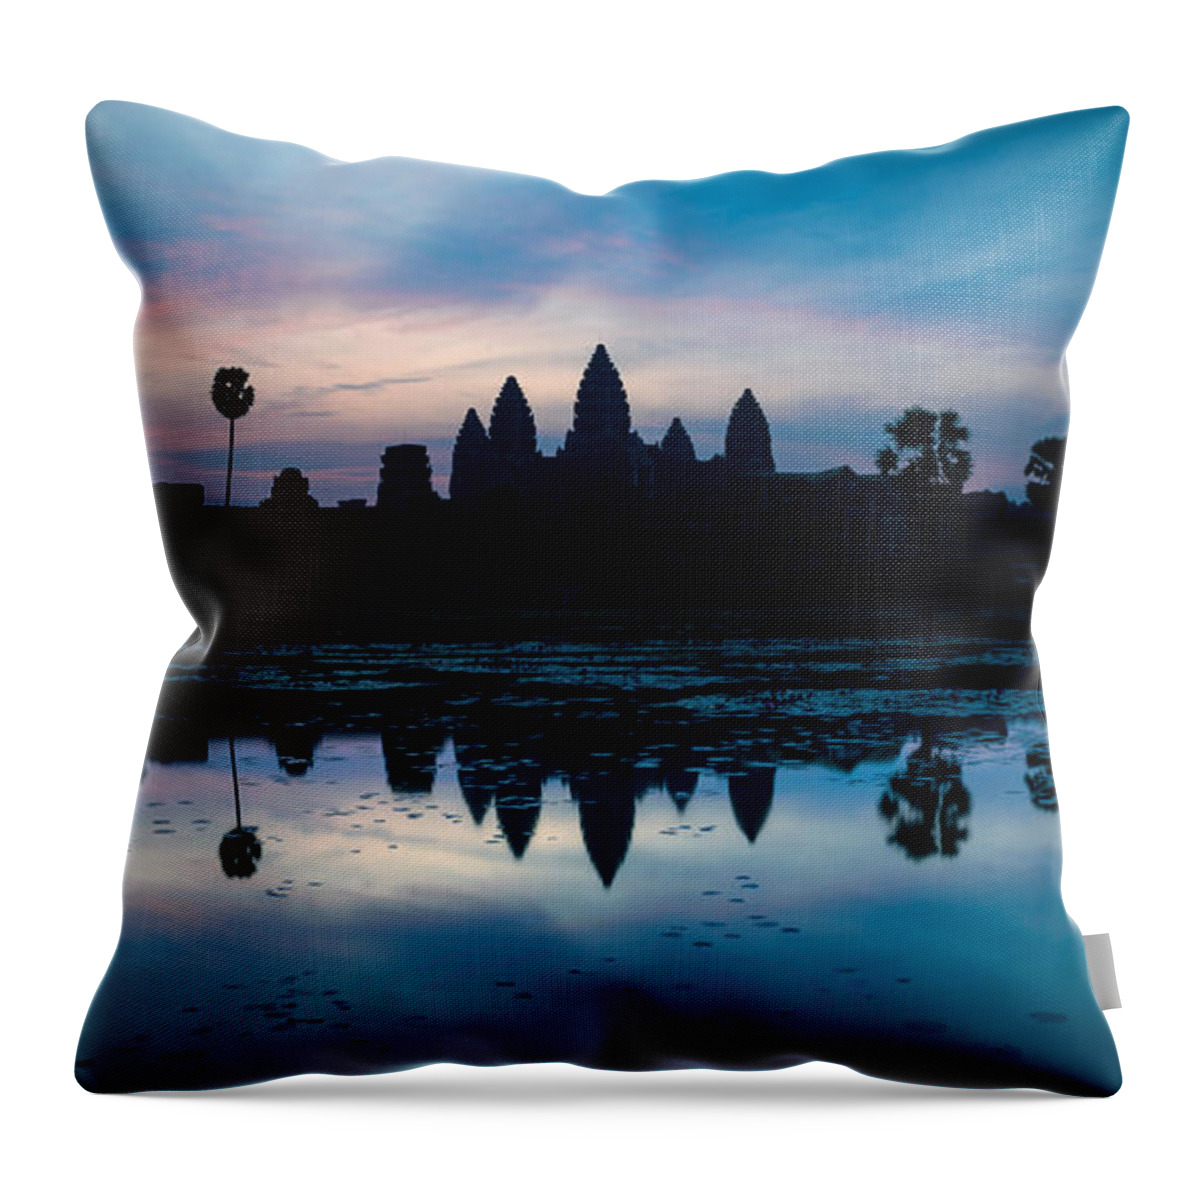 Photography Throw Pillow featuring the photograph Temple At The Lakeside, Angkor Wat by Panoramic Images